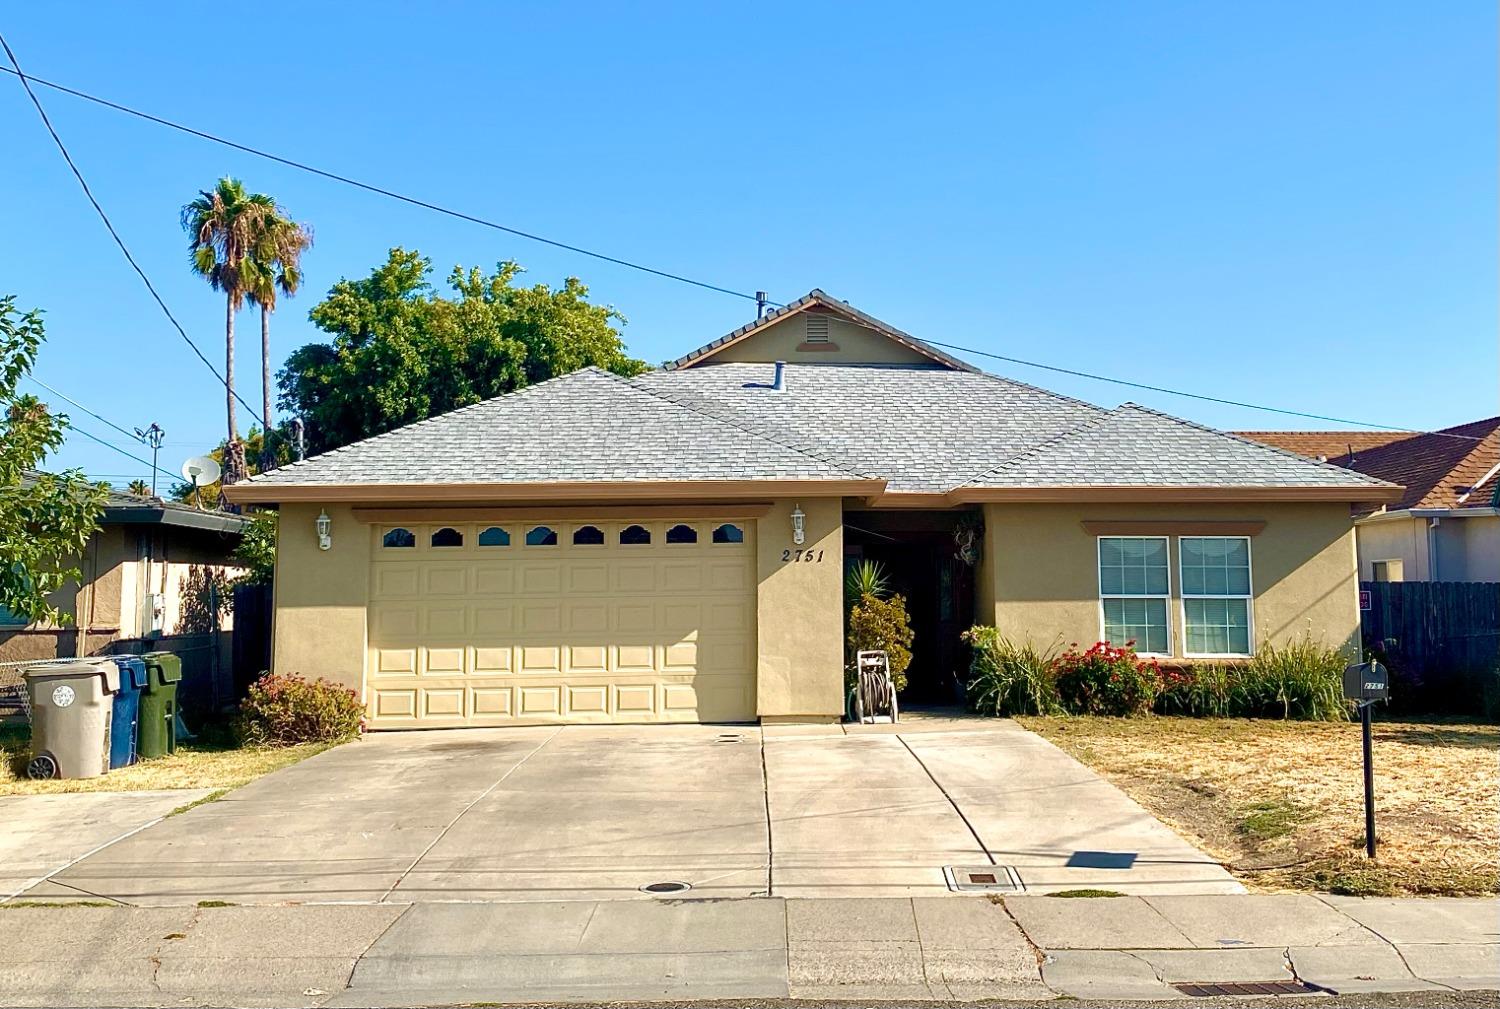 Photo of 2751 Wah Ave in Sacramento, CA